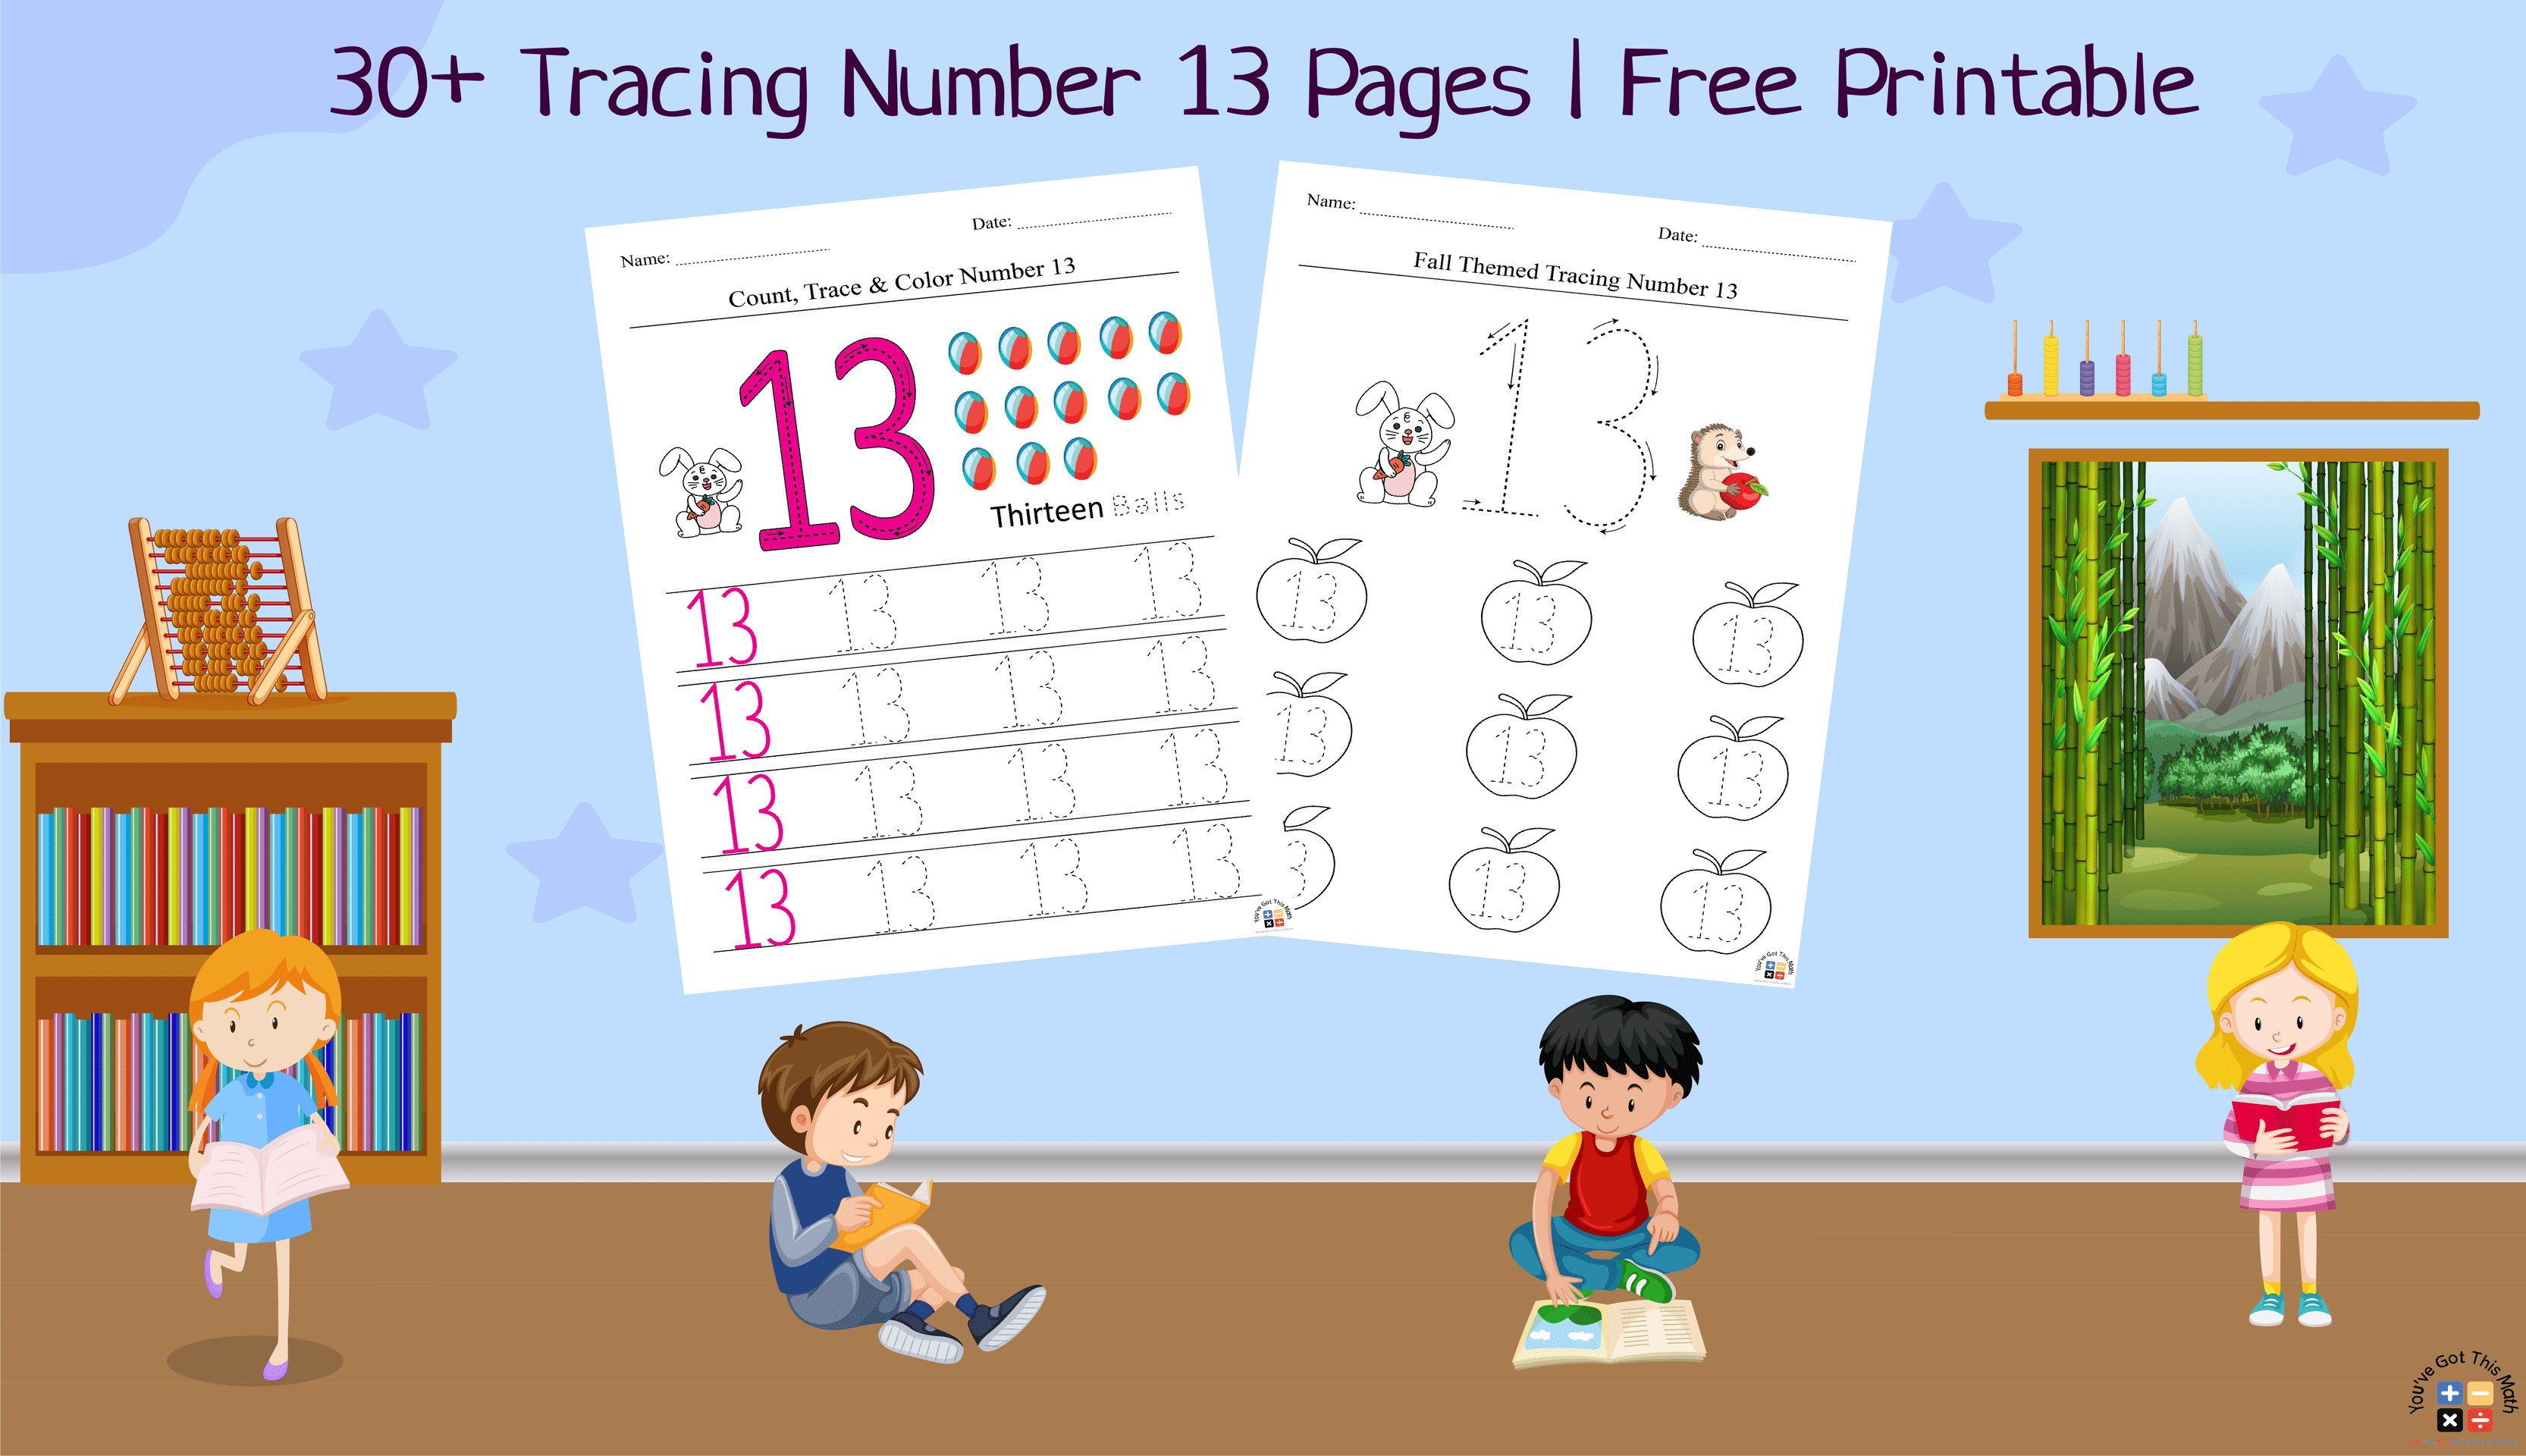 30+ Tracing Number 13 Pages | Free Printable